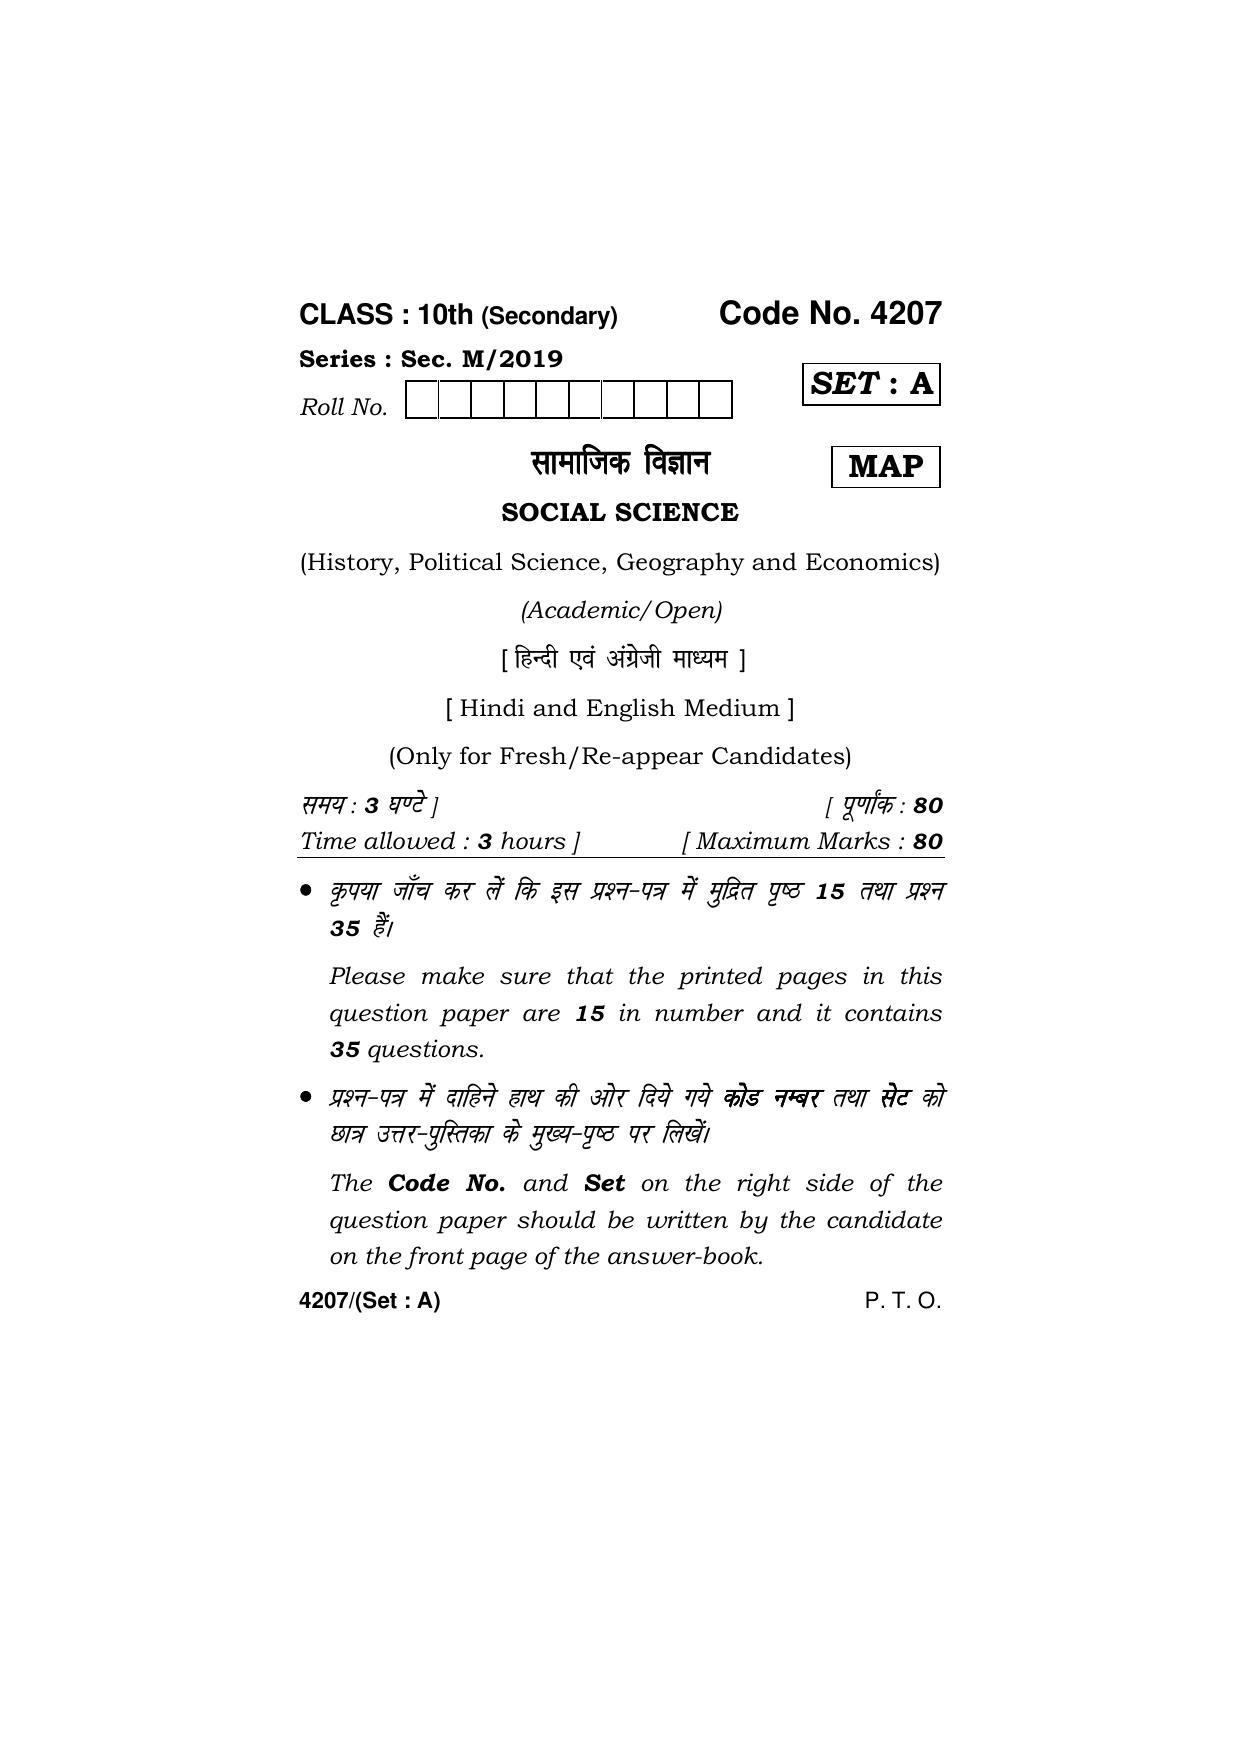 Haryana Board HBSE Class 10 Social Science (All Set) 2019 Question Paper - Page 1